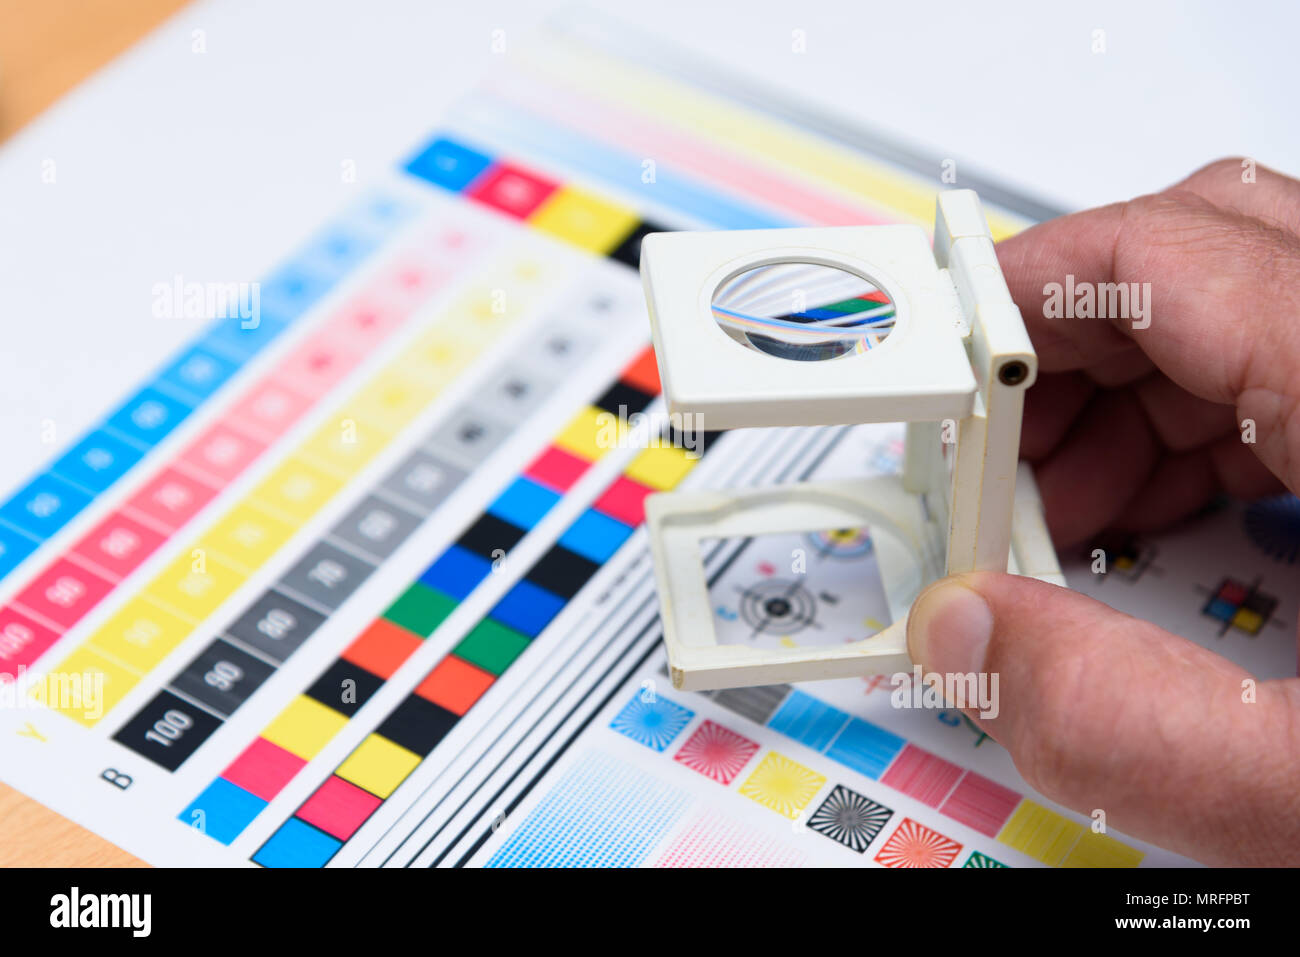 Printing Thread Counter Being Used by Male Hand Measurement Color Management Industry Object Stock Photo